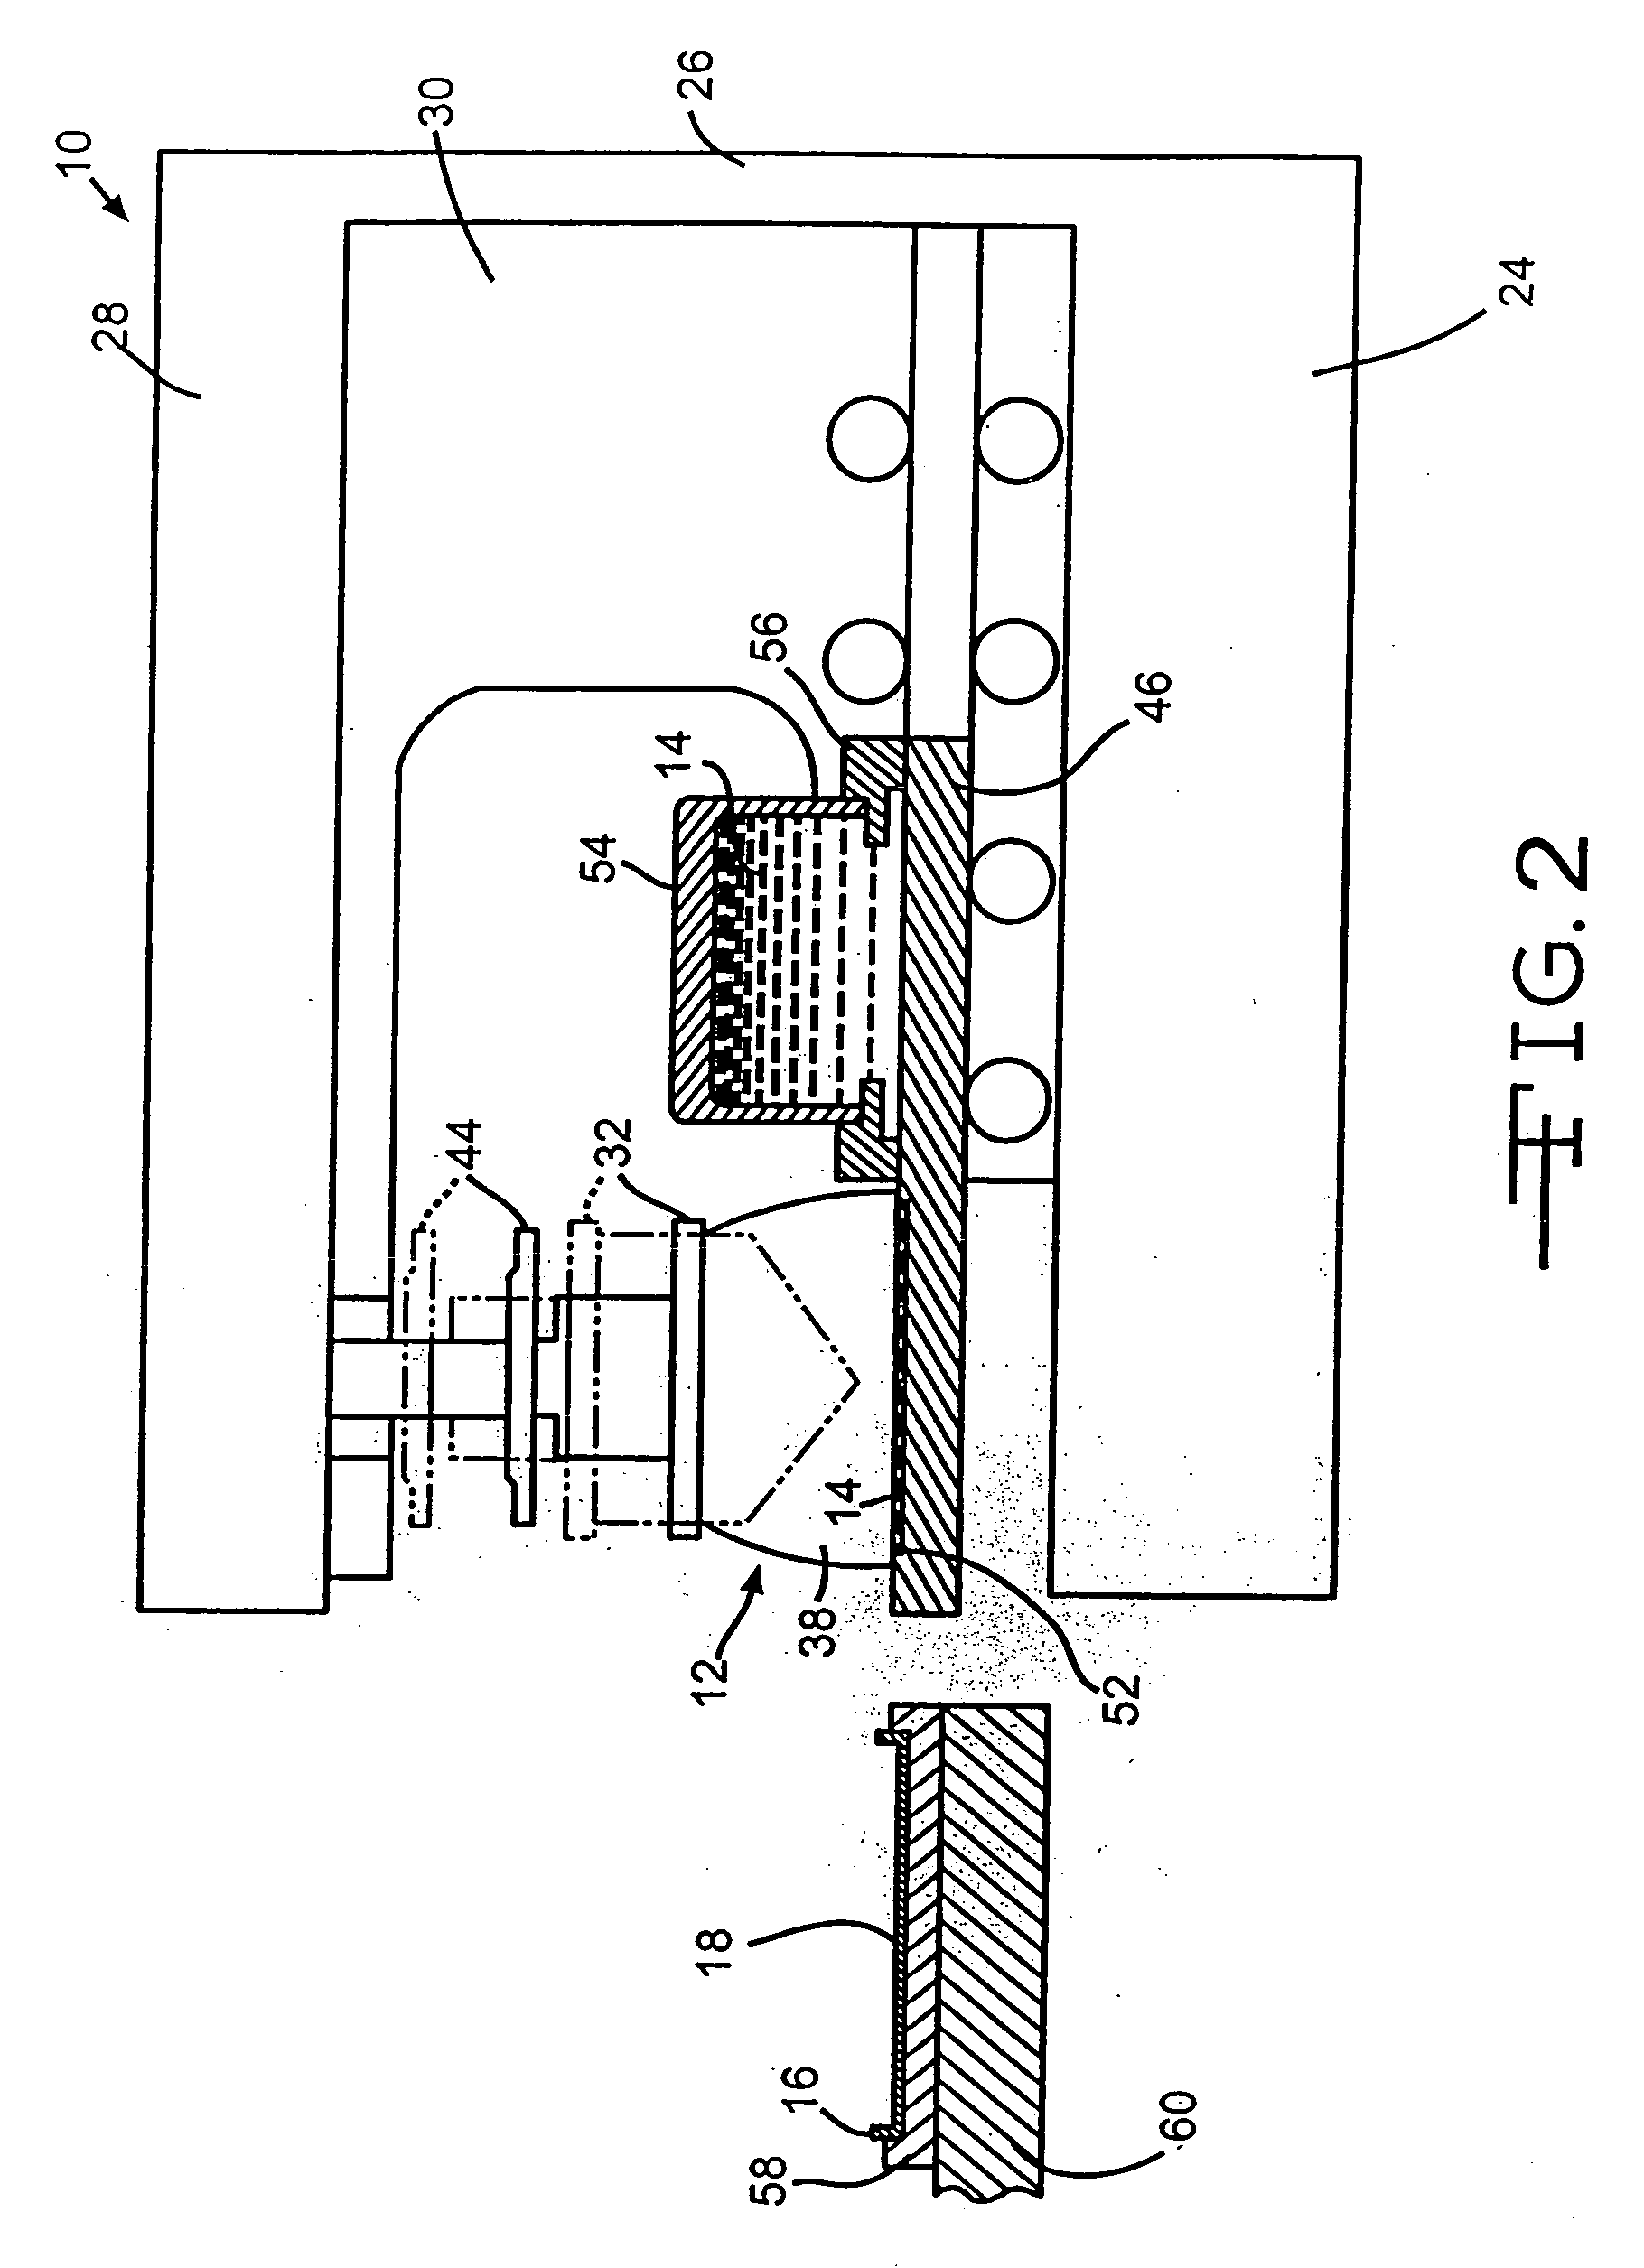 Method of pad printing in the manufacture of capacitors